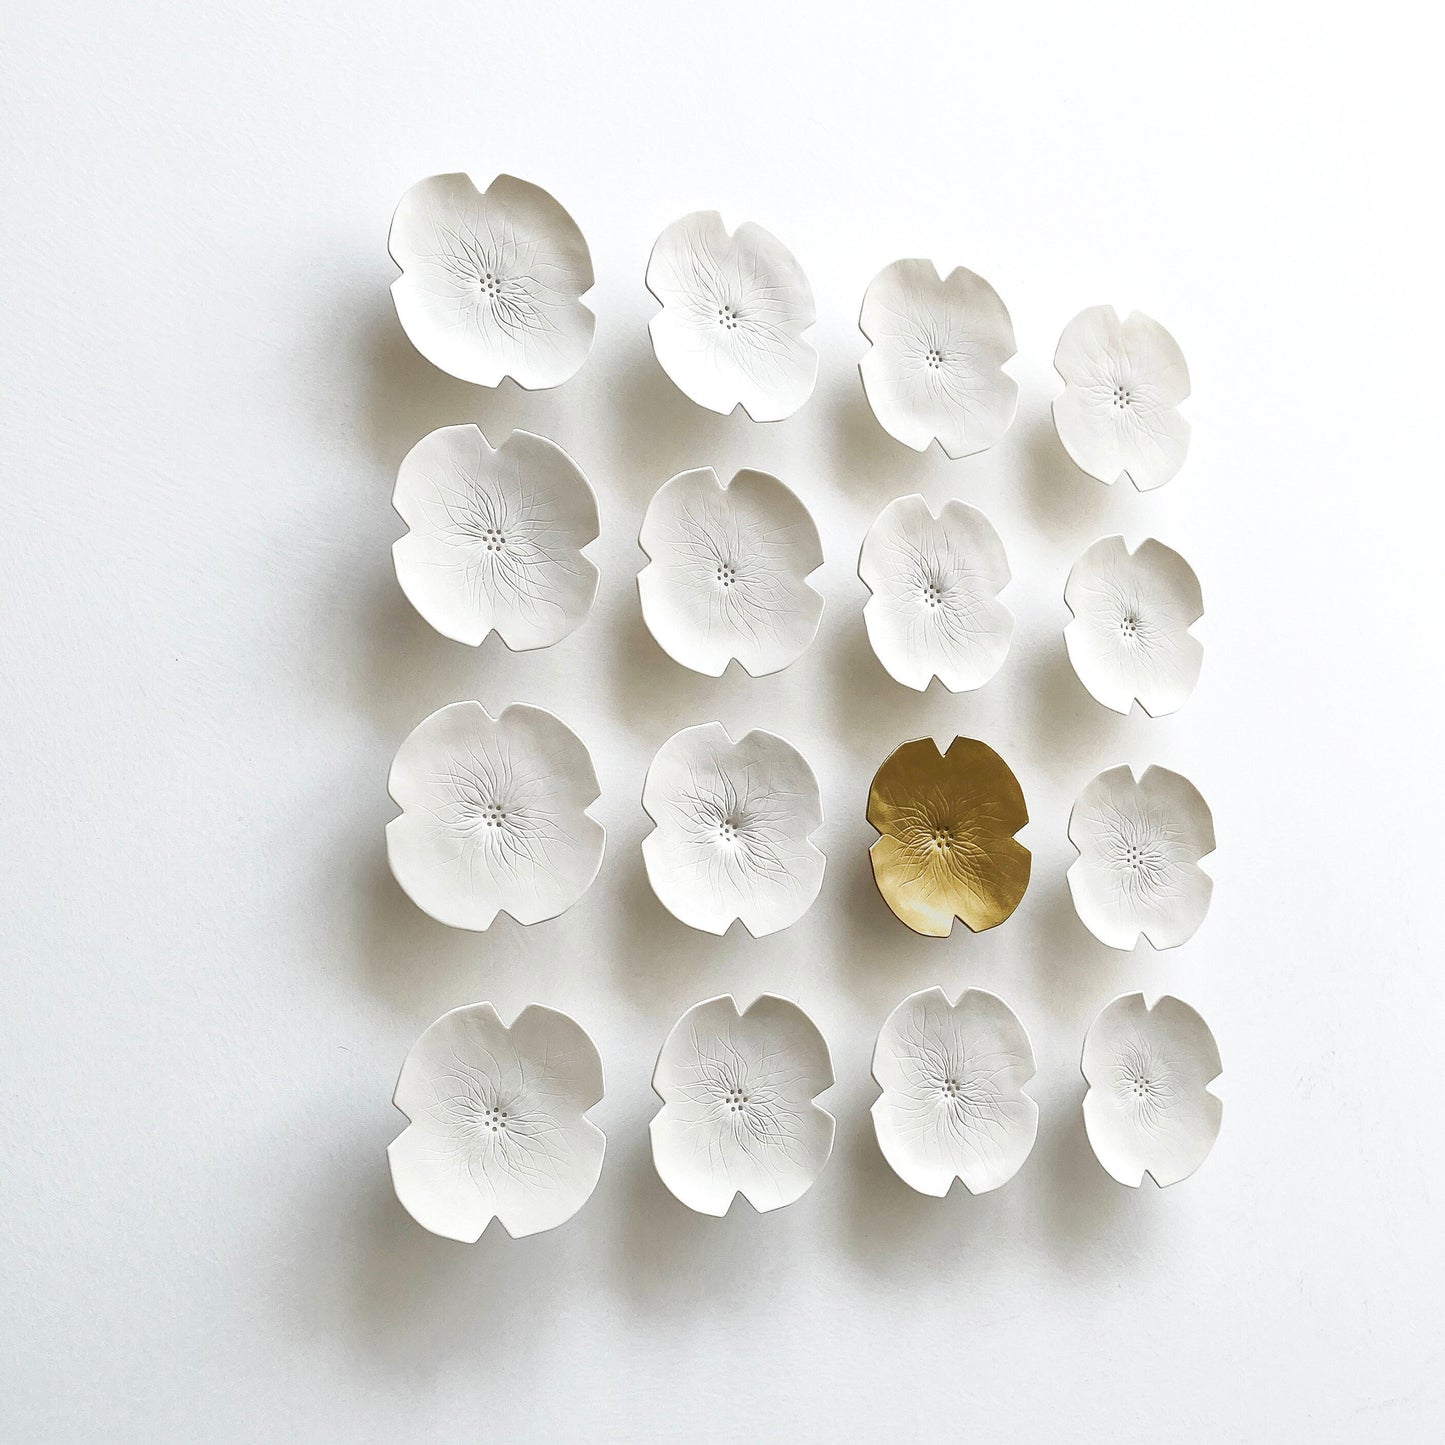 16 Graces - Large wall art set Contemporary wall sculpture 16 Ceramic flowers White & gold porcelain Modern original artwork MADE TO ORDER